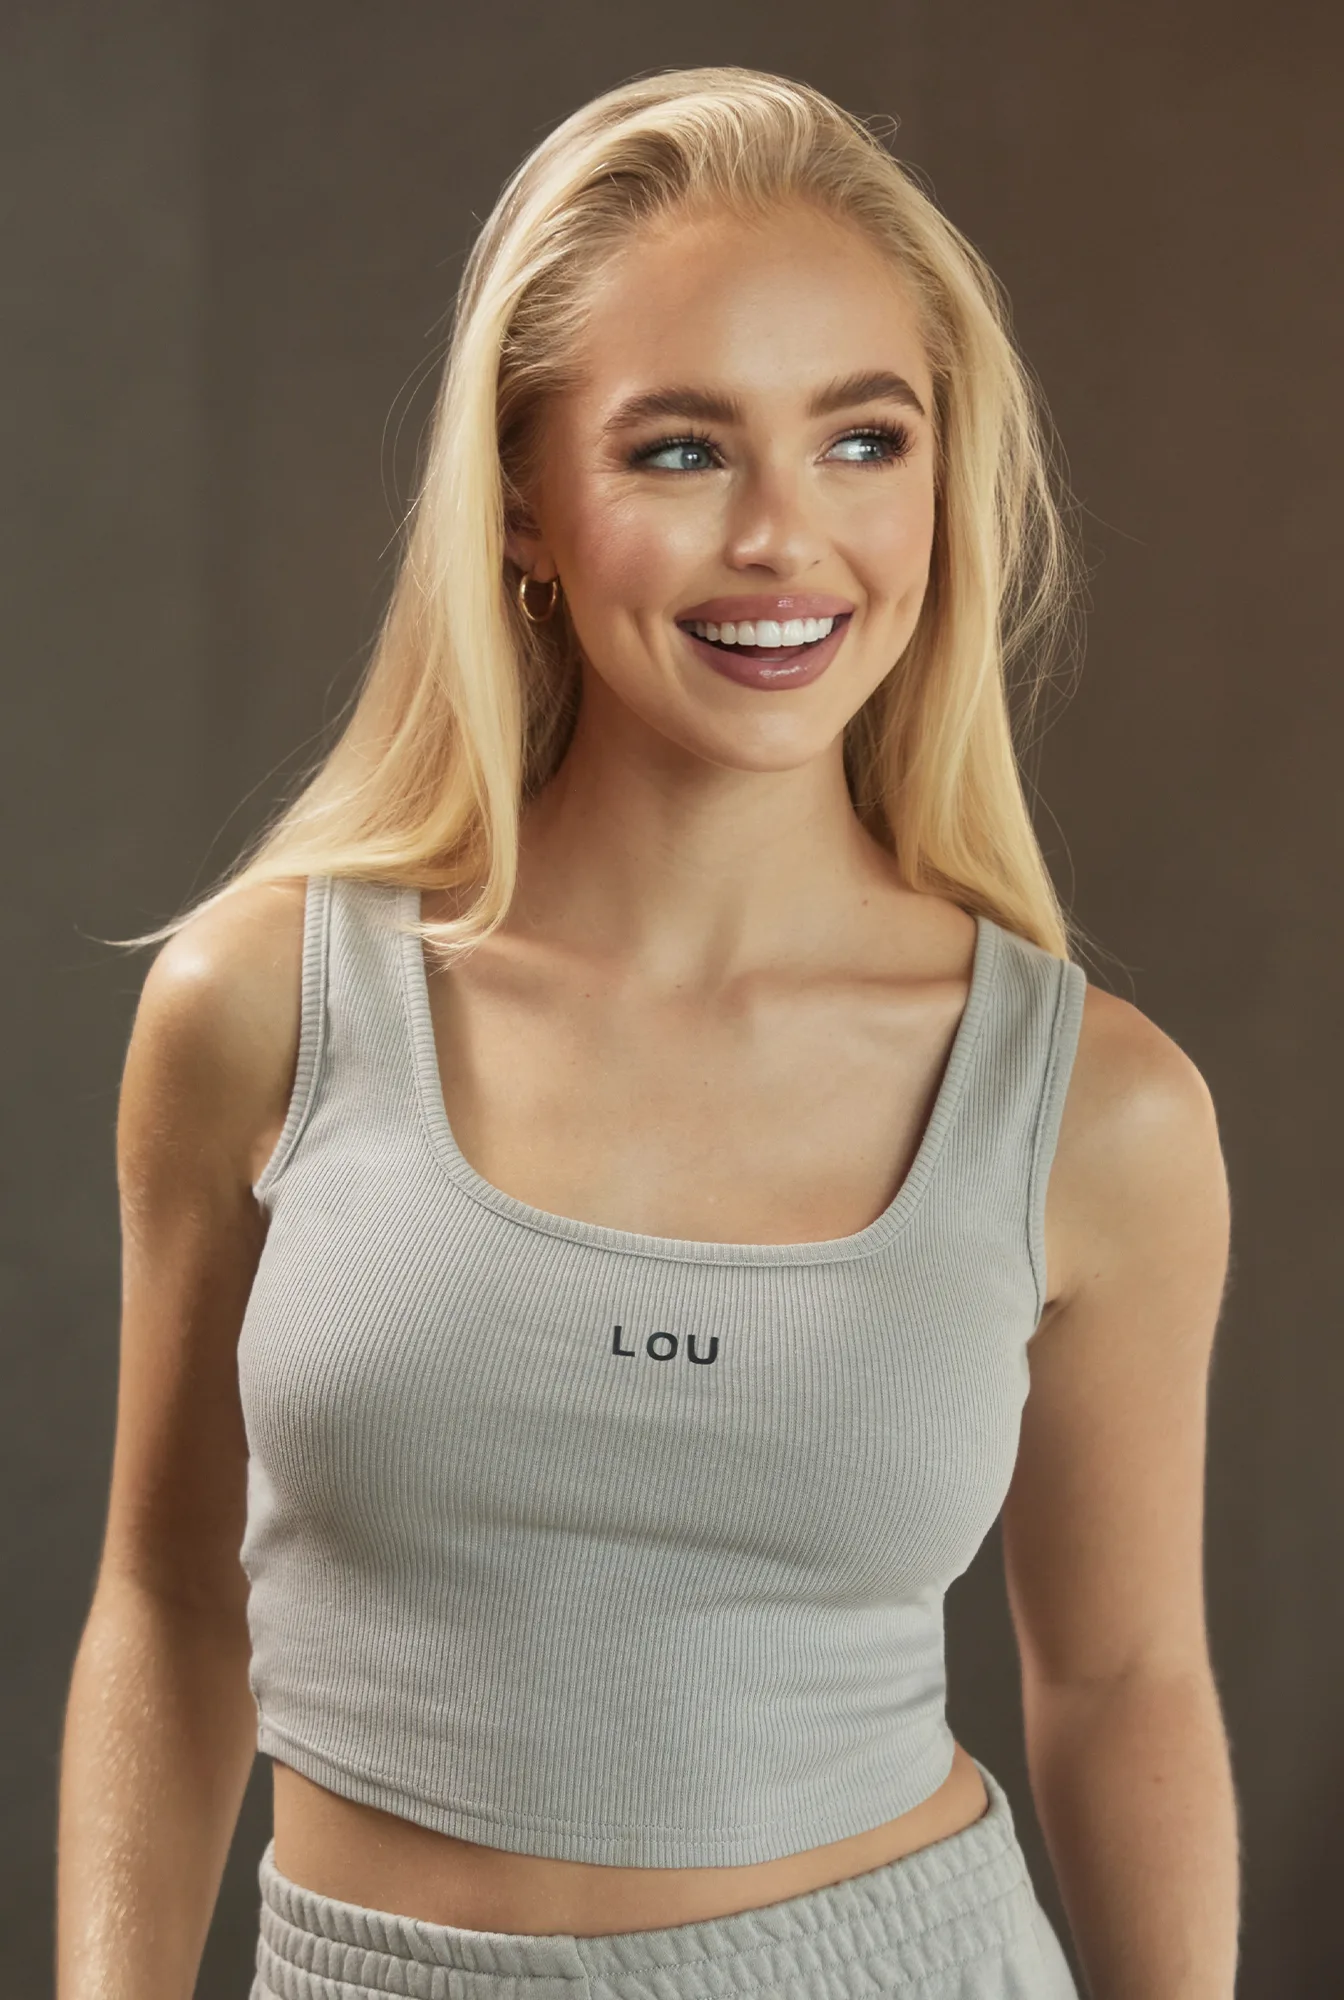 Zorca Grey - a classic gray top with a caption